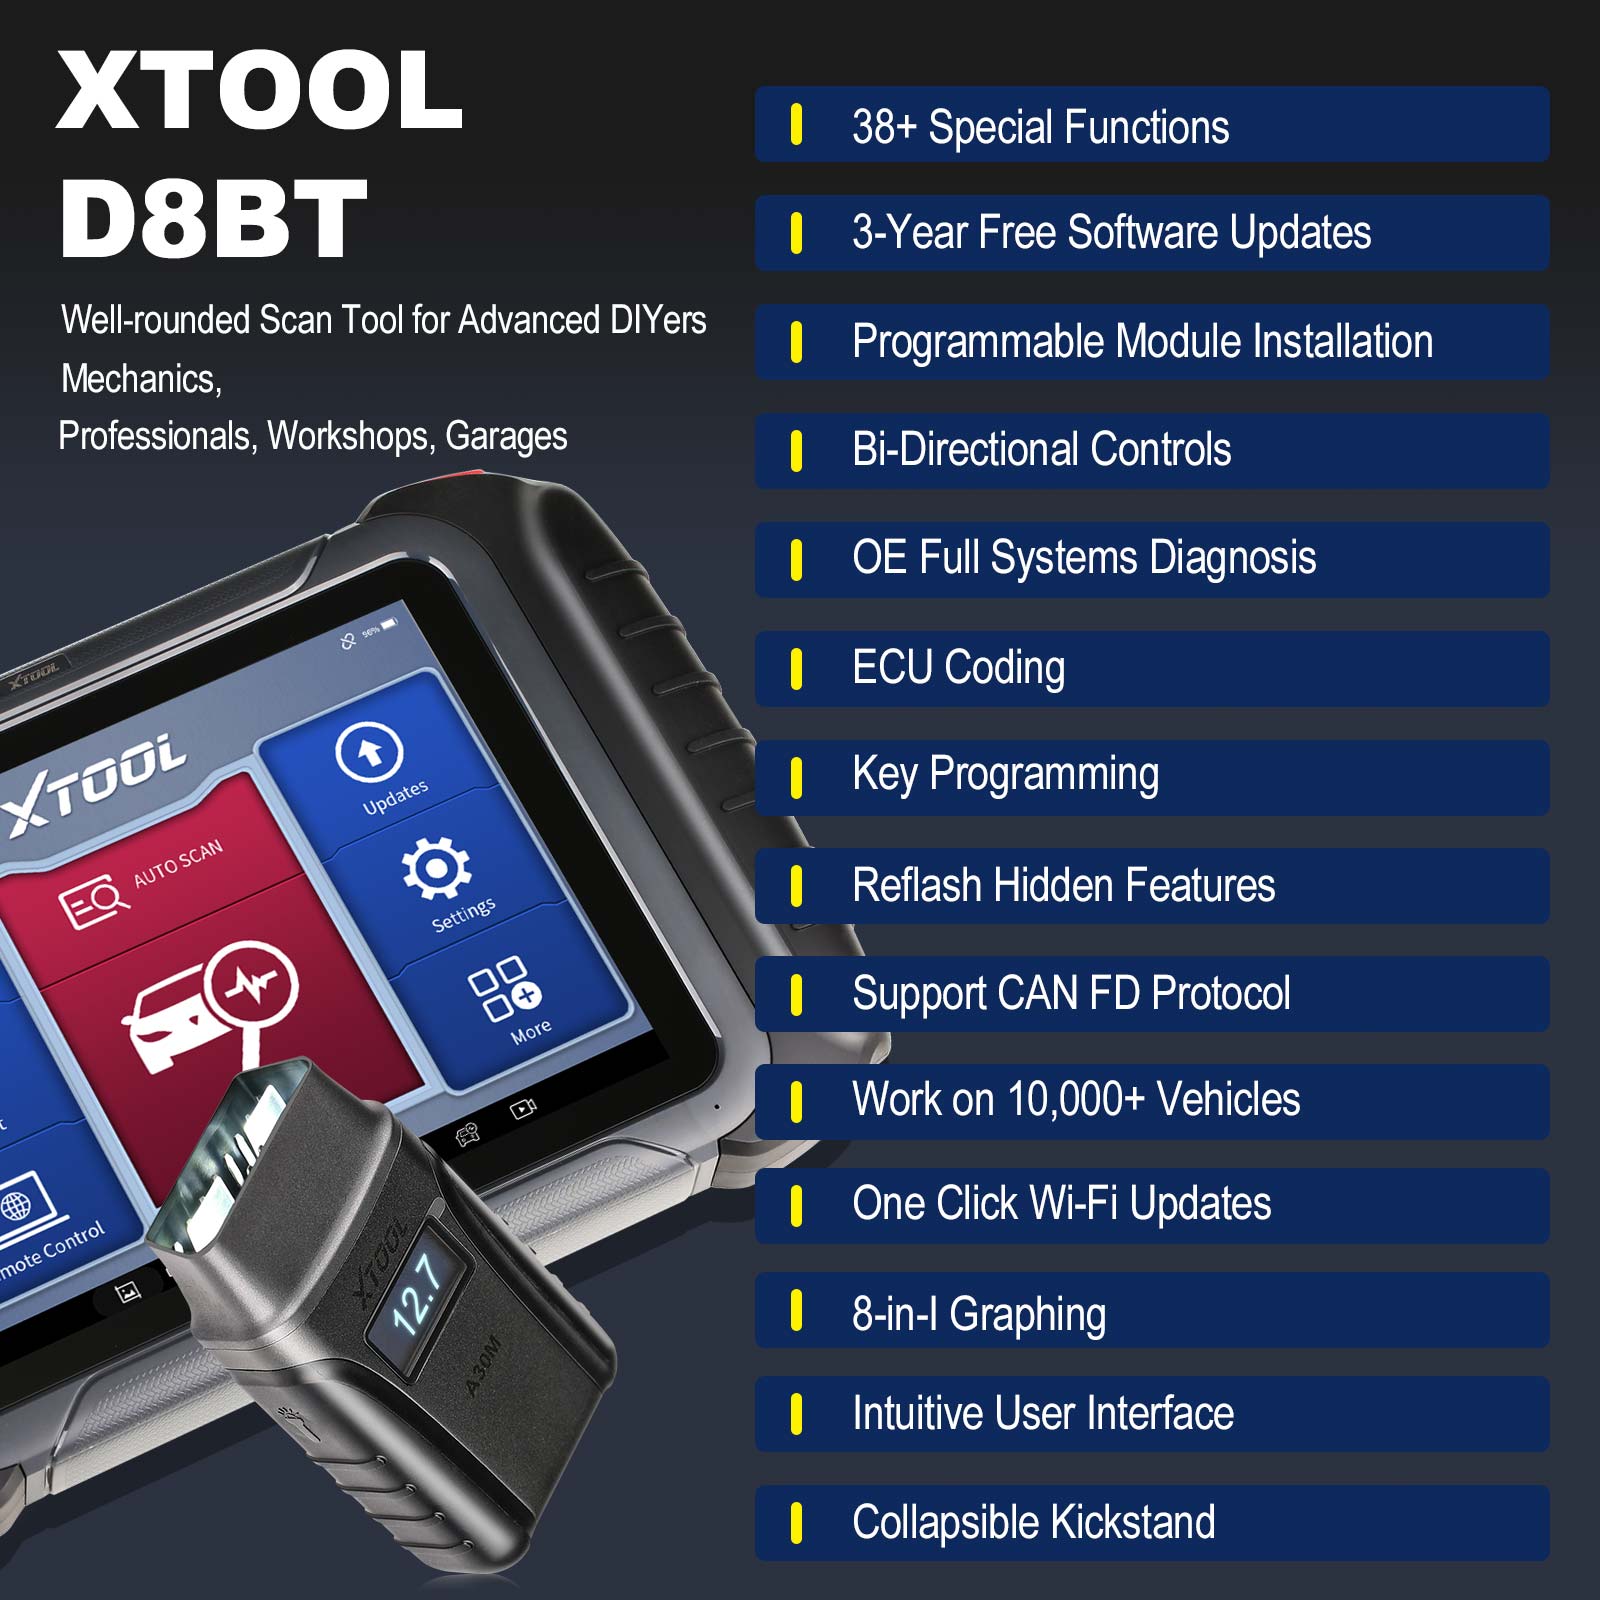 Xtool H6Pro Master Smart Diagnostic Tool Device